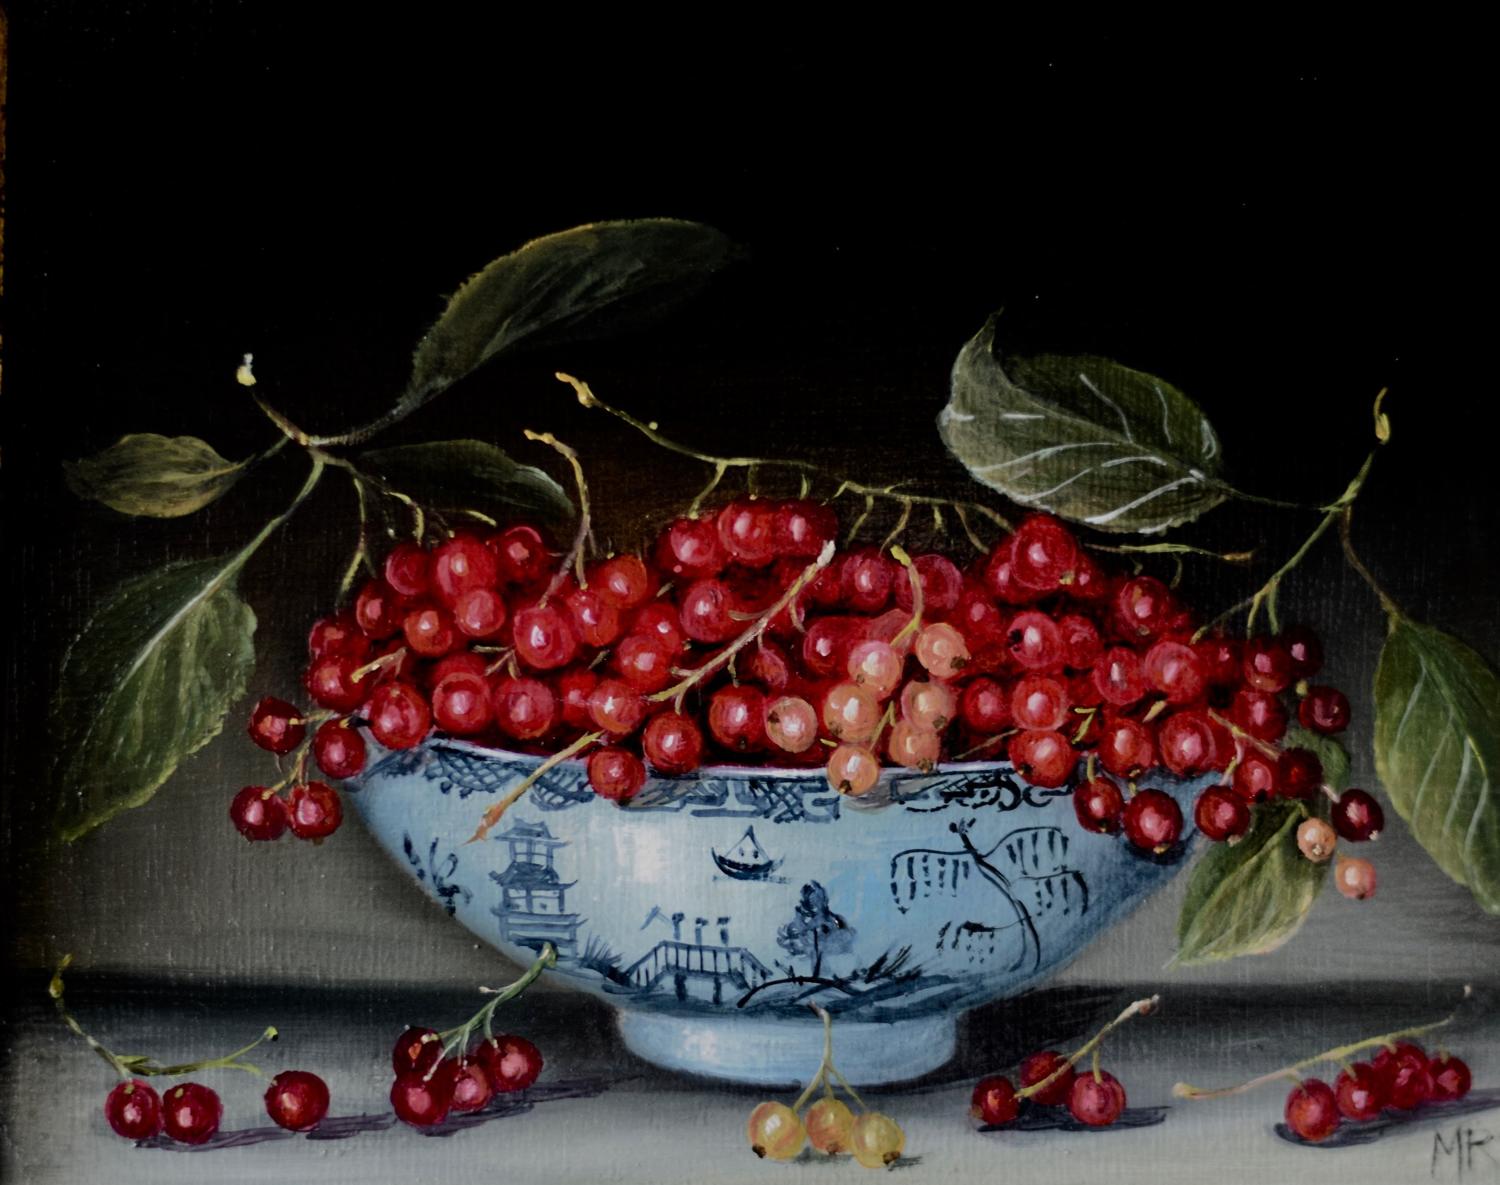 Bowl of red currants